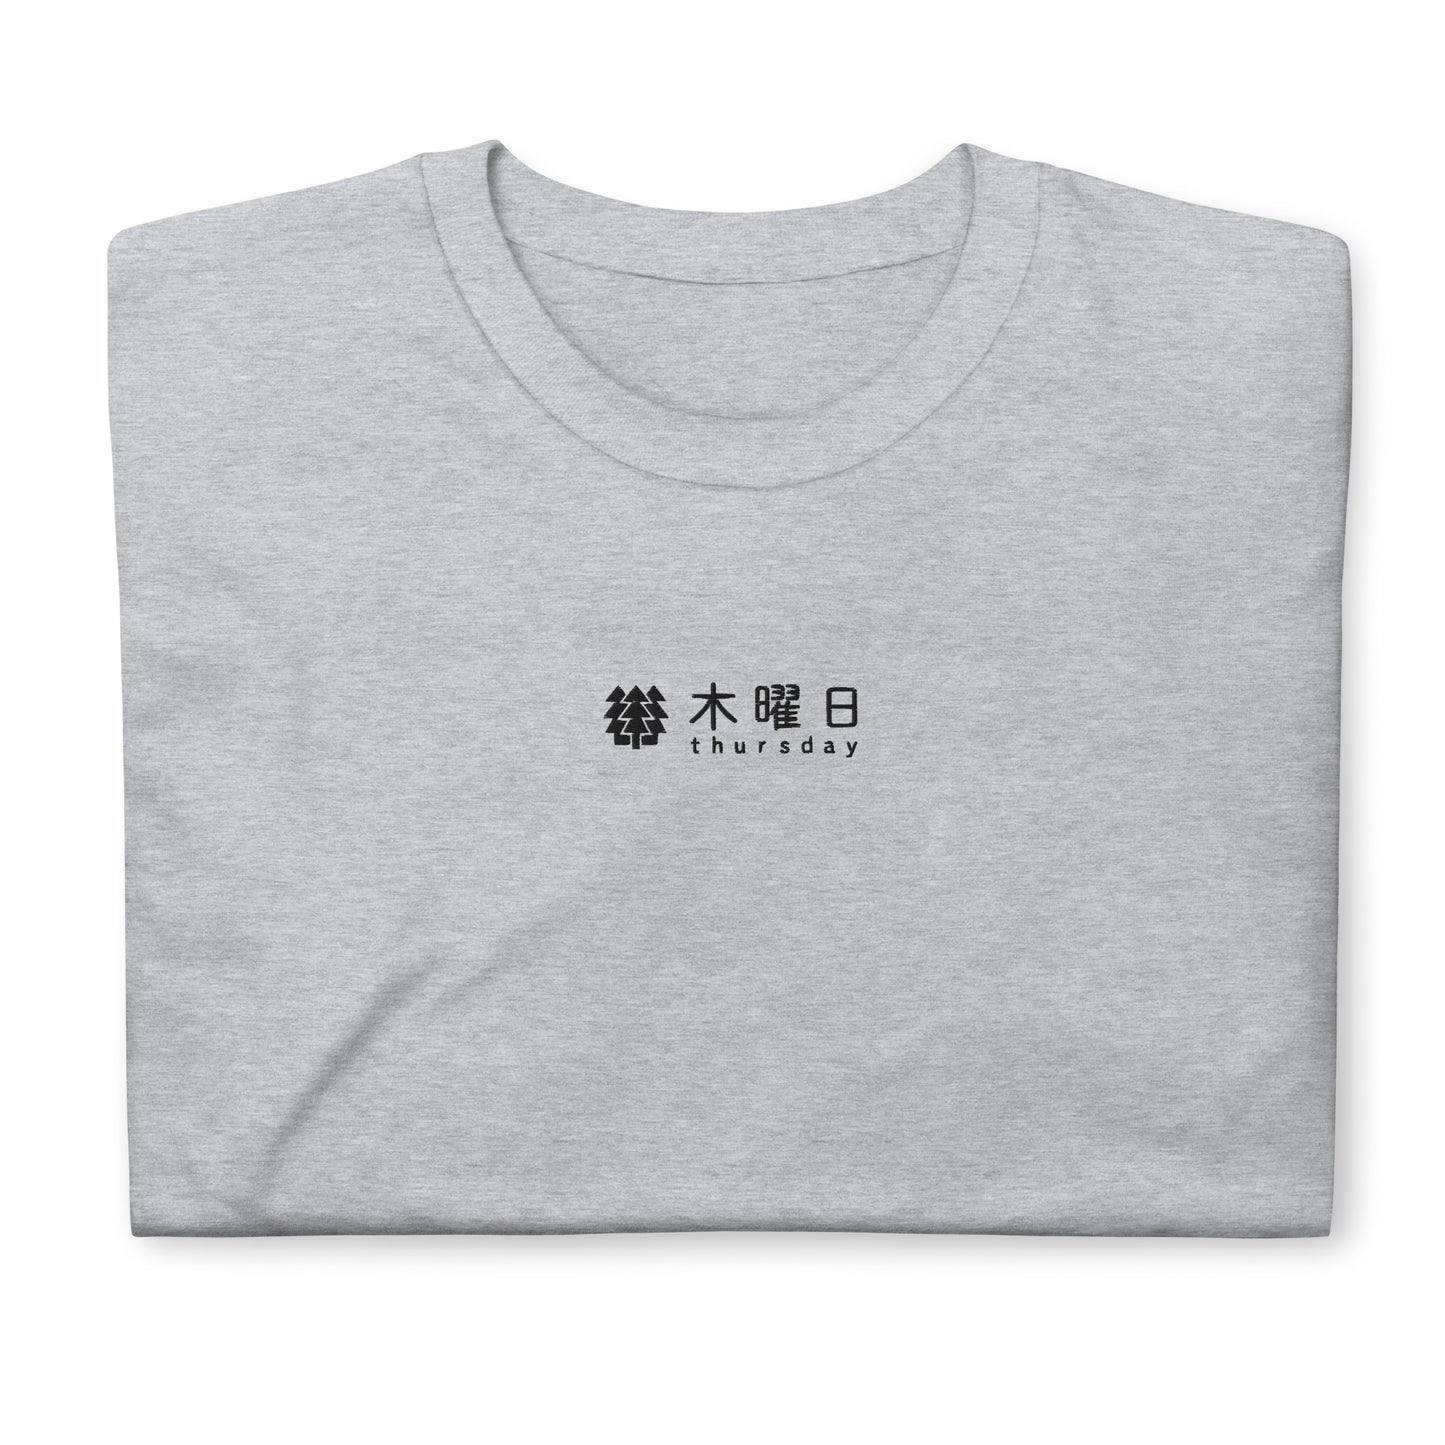 Light Gray High Quality Tee - Front Design with an White Embroidery "Thursday" in Japanese and English